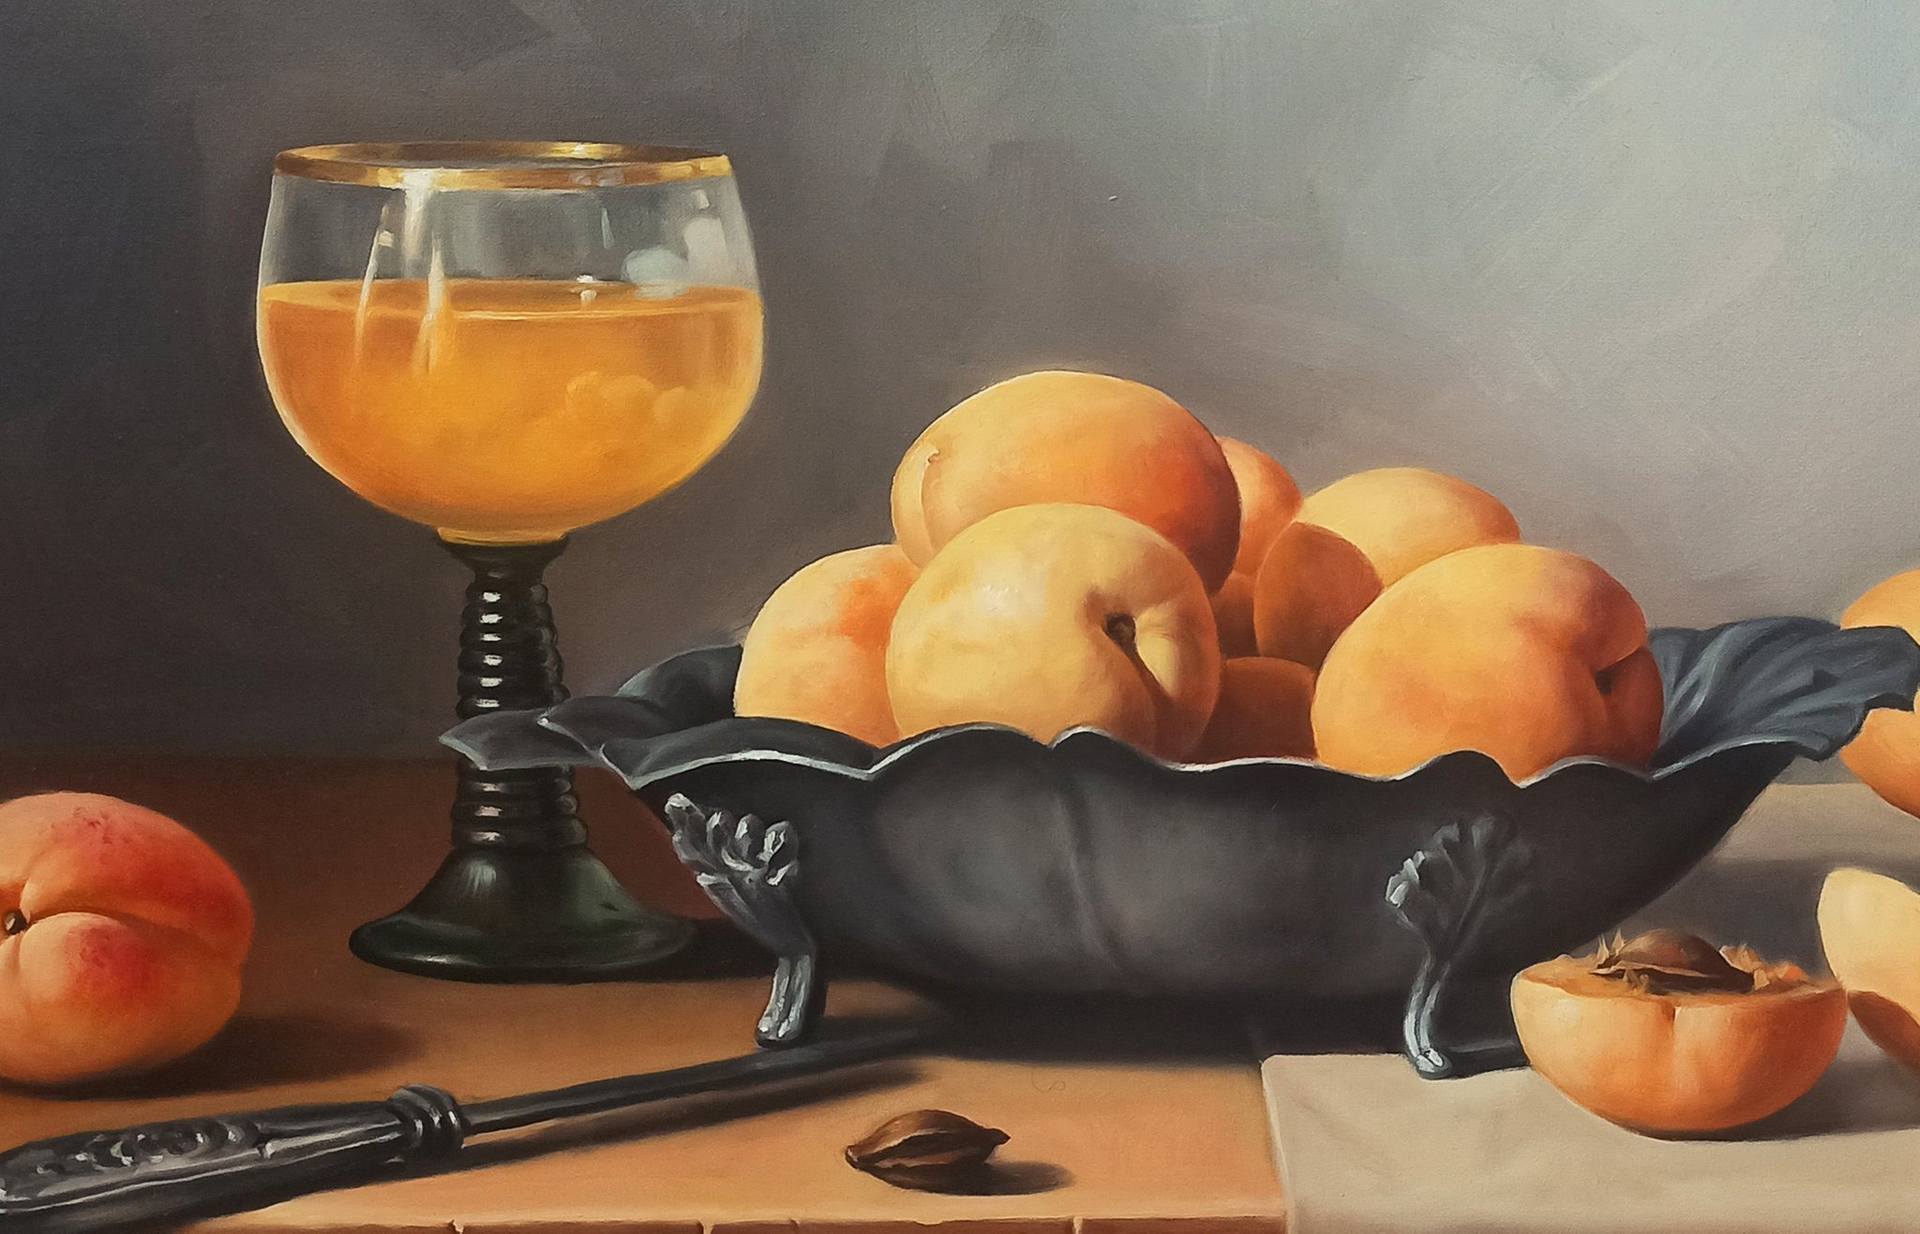 Artush Voskanyan/Still life with apricot (40x60cm, oil painting